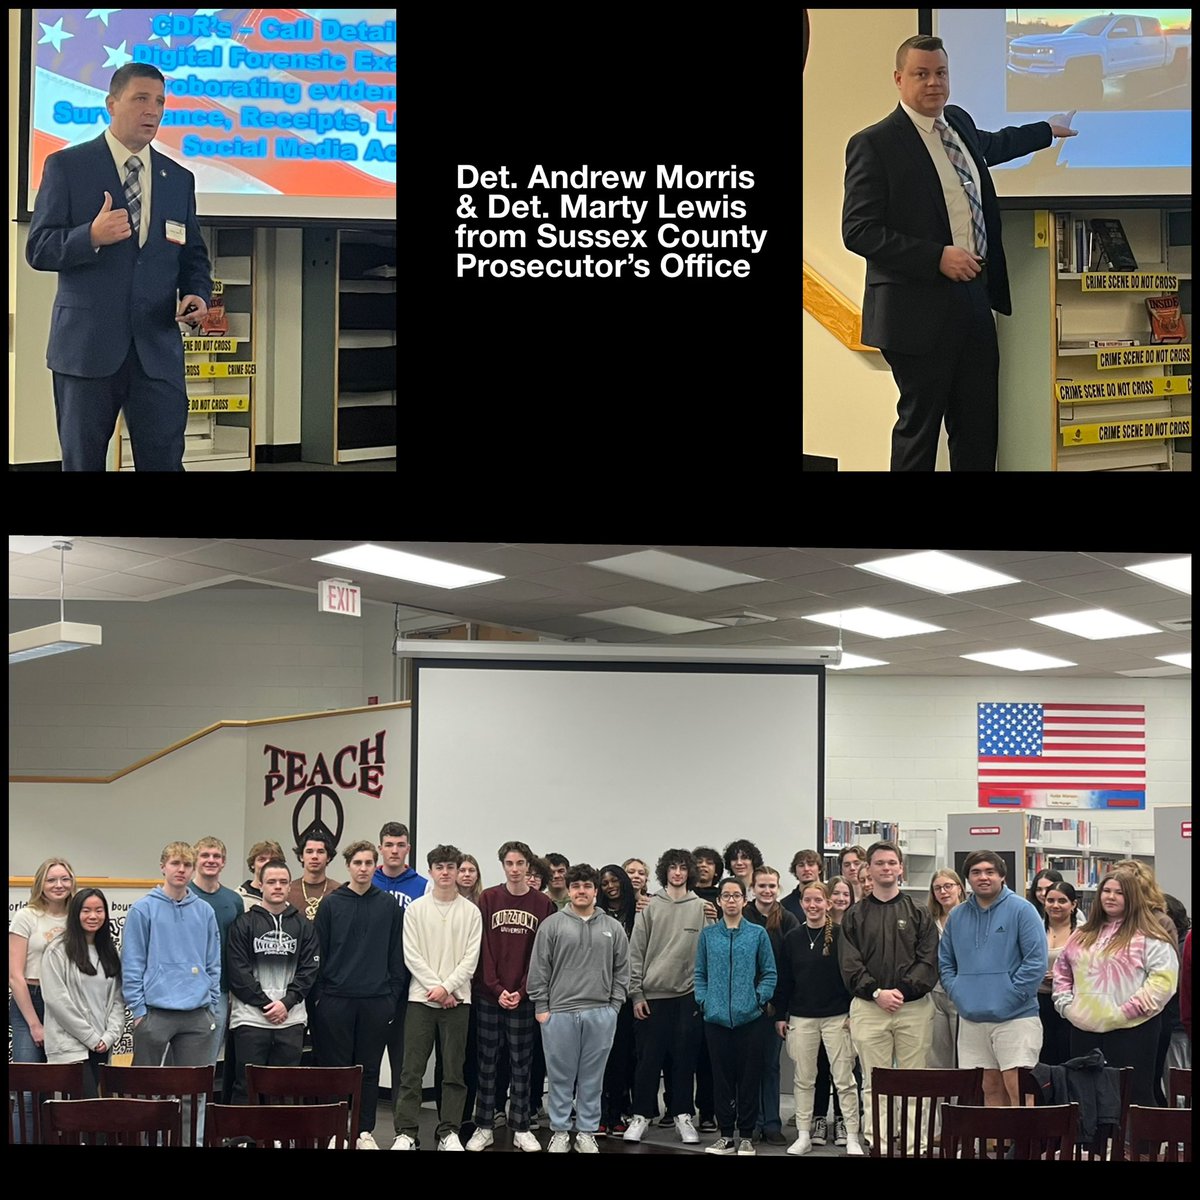 A big thank you to Det. Andrew Morris & Det. Marty Lewis for speaking with the True Crime Literature & Street Law classes today about the Hayden Harris Homicide Investigation. @HPRwildcats